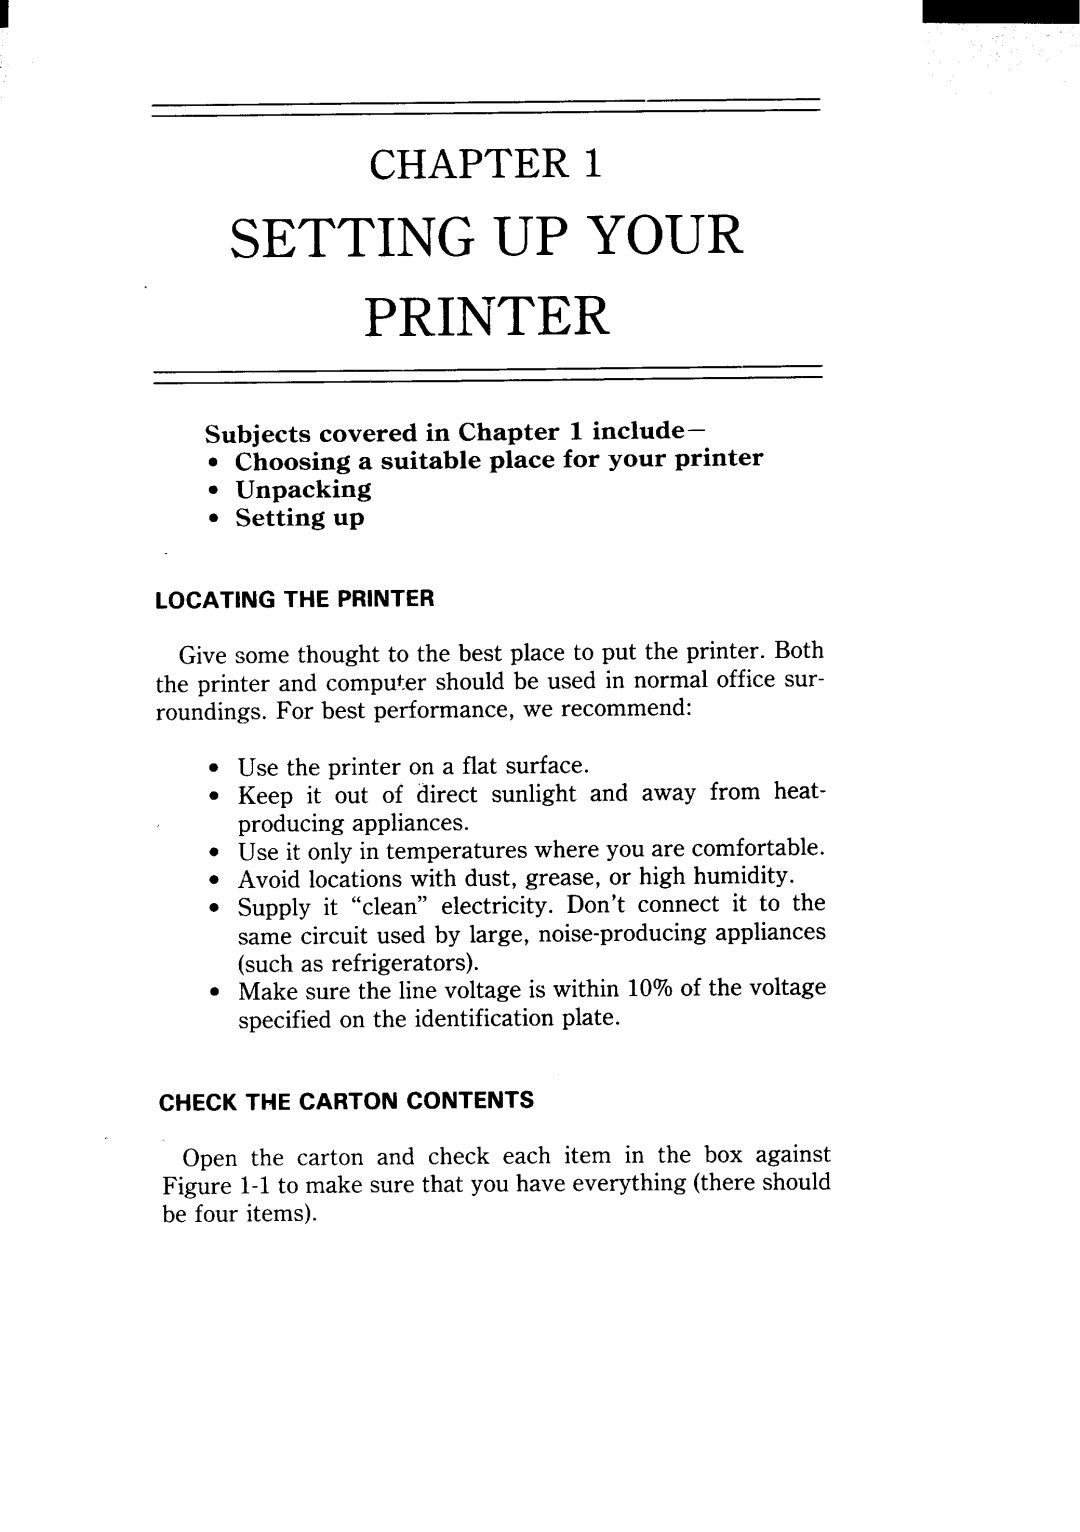 Star Micronics NX-15 user manual Setting Up Your Printer, Chapter 